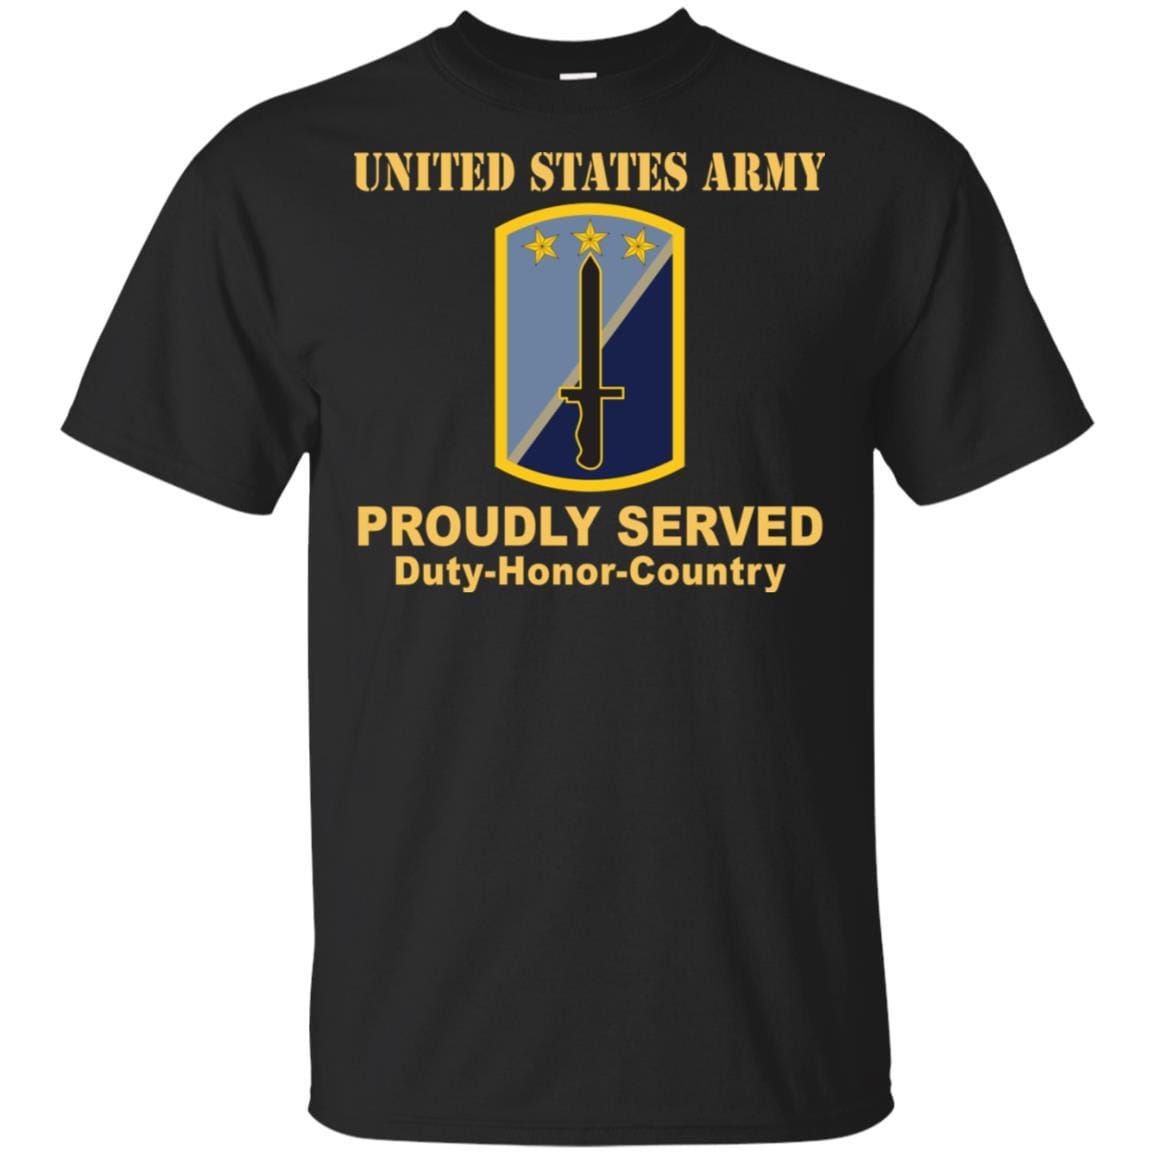 US ARMY 170TH INFANTRY BRIGADE- Proudly Served T-Shirt On Front For Men-TShirt-Army-Veterans Nation